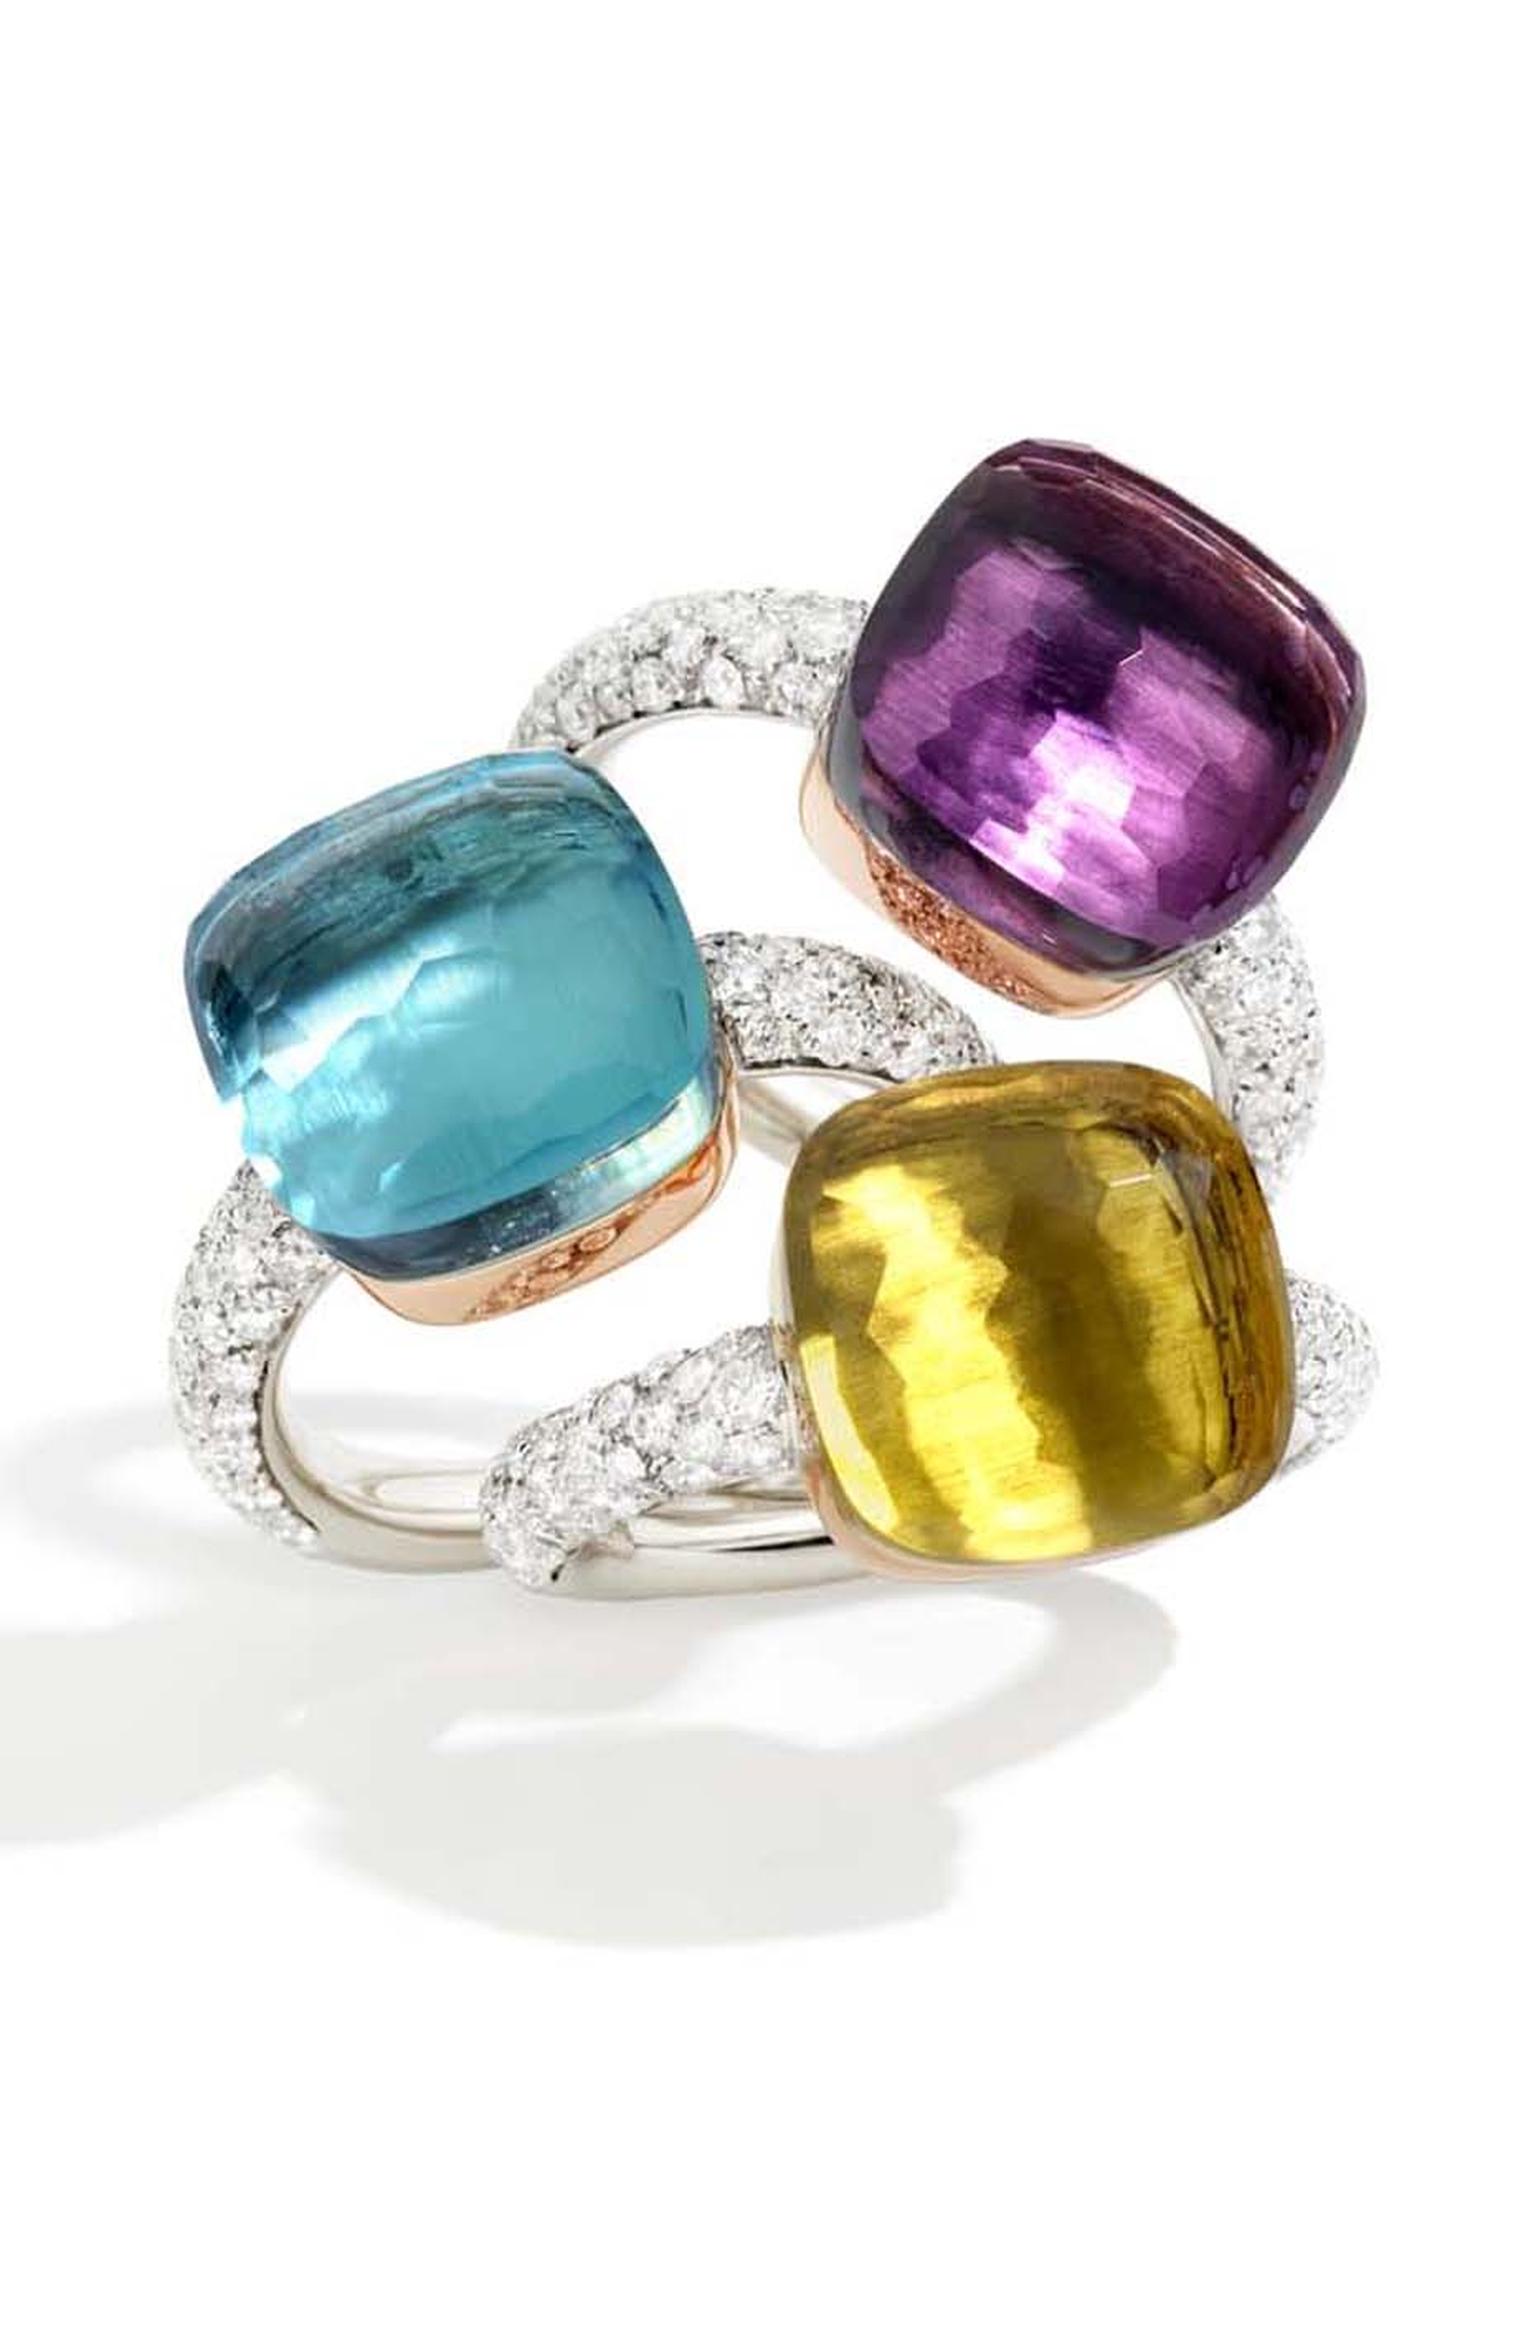 Pomellato Nudo ring collection diamond rings can be stacked for a very personal blend of colours, or worn individually for a minimalist look.